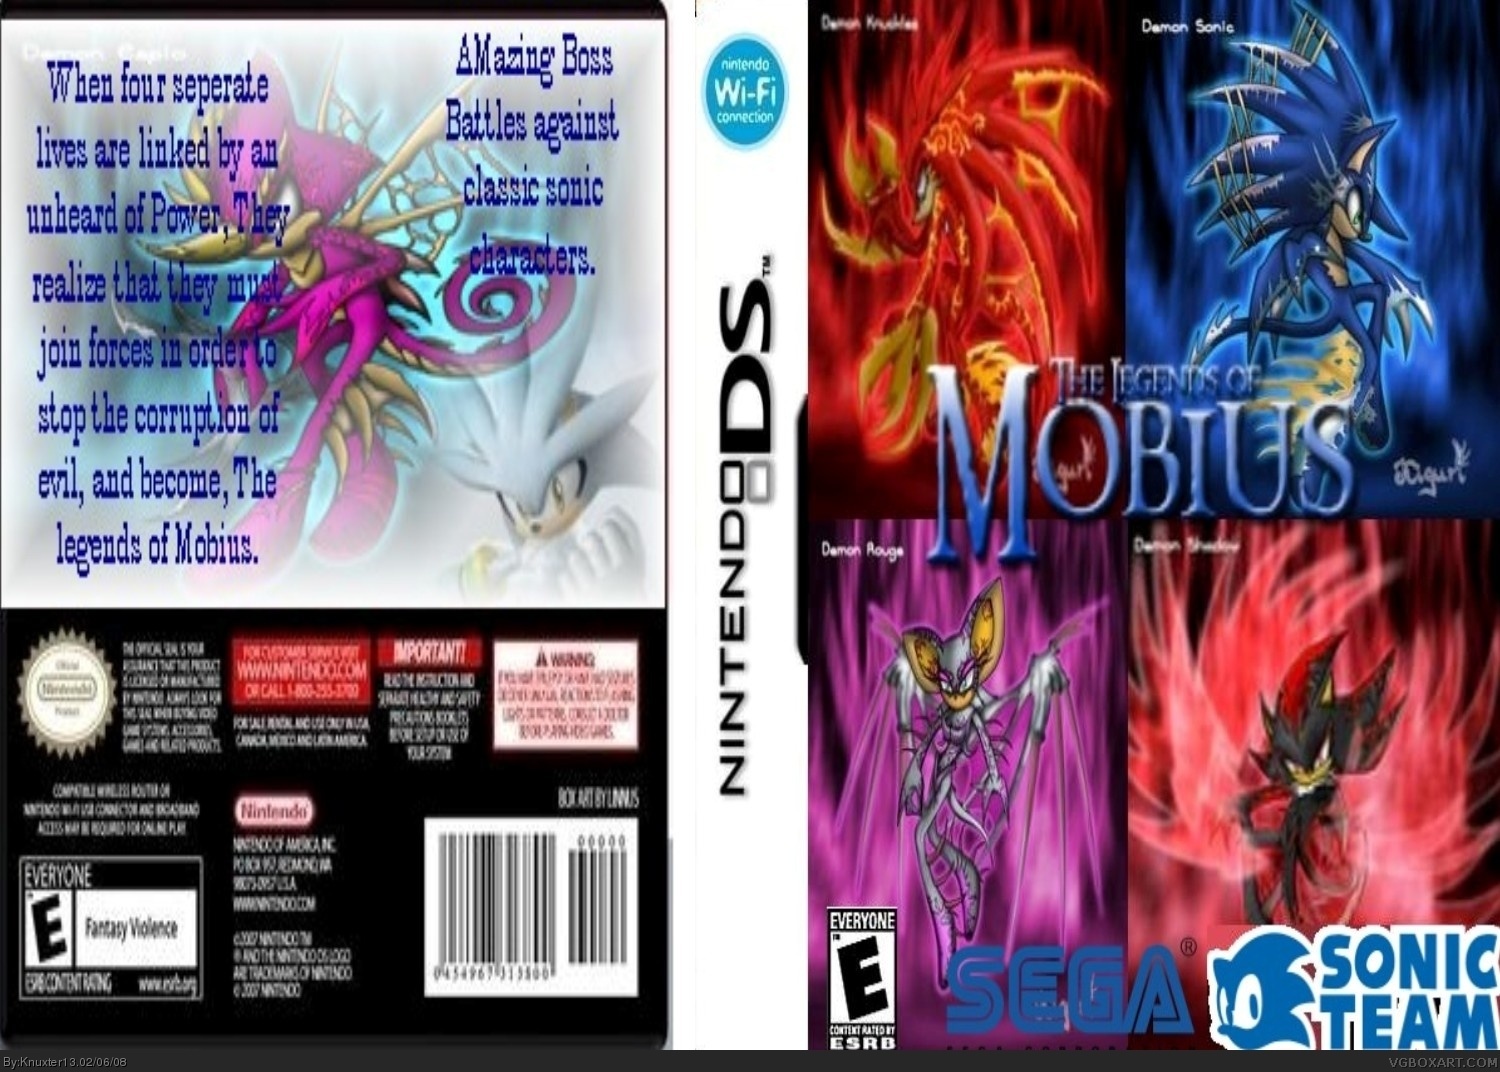 The Legends Of Mobius box cover